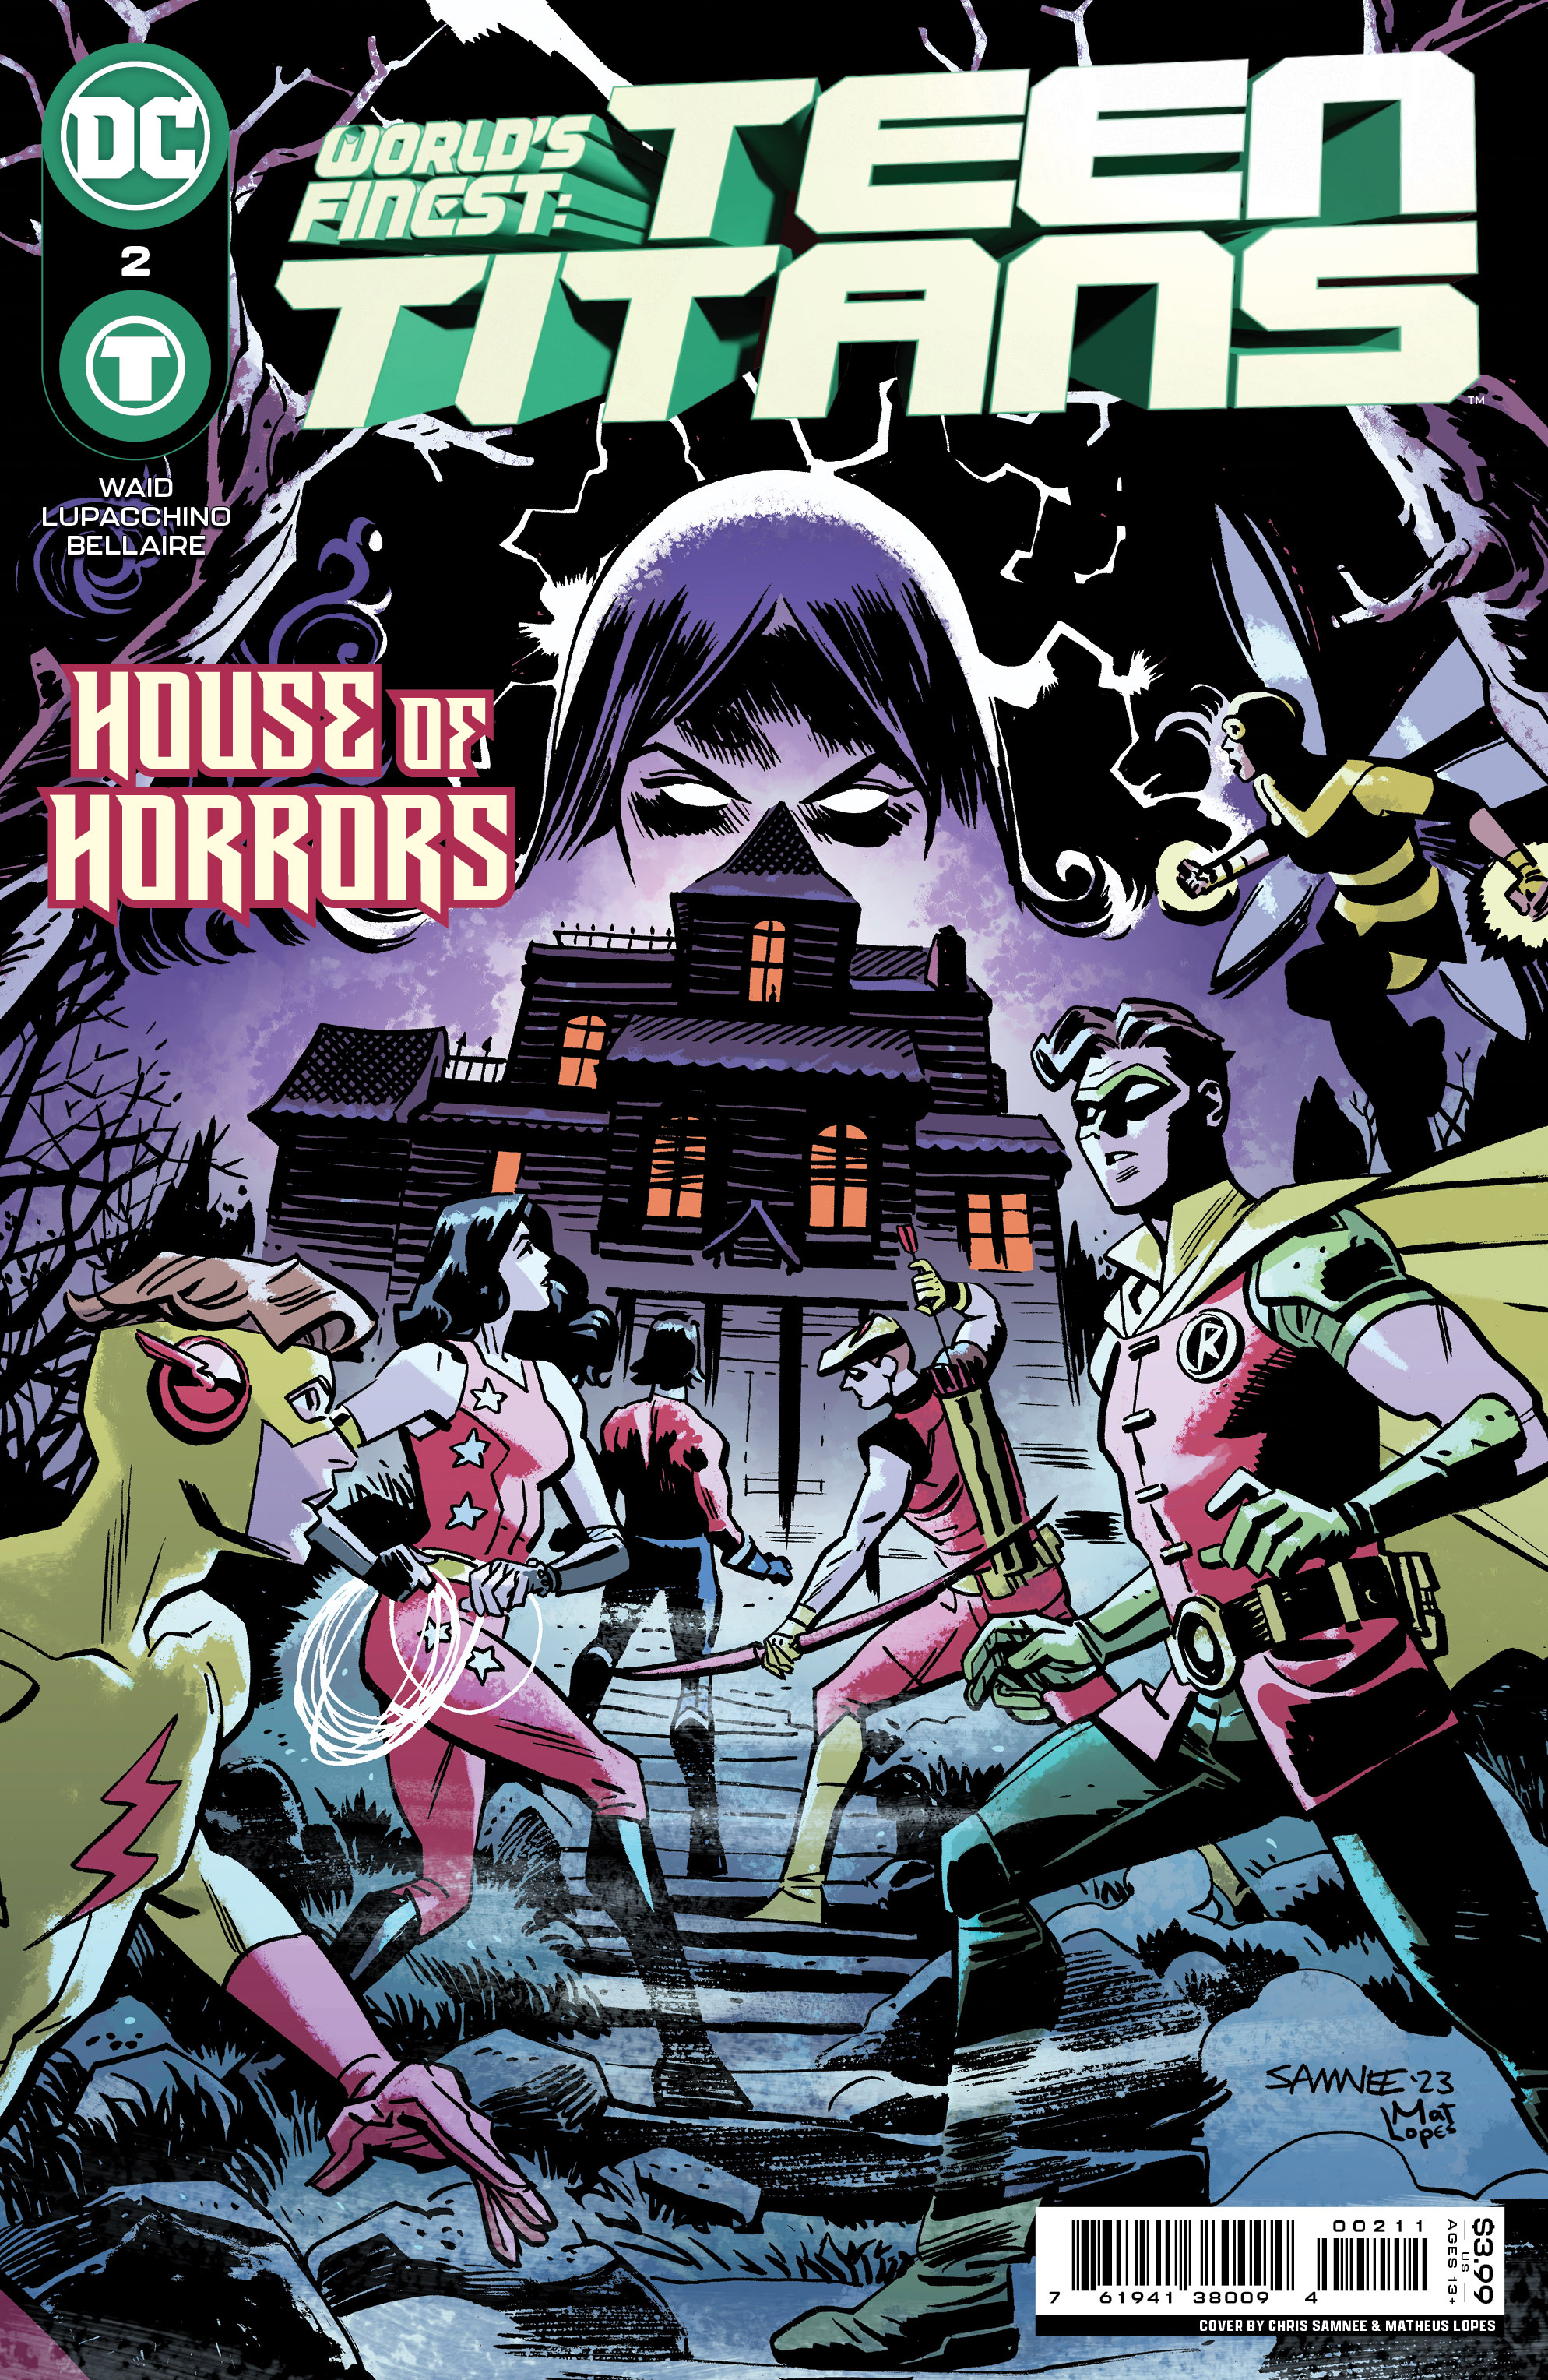 Worlds Finest Teen Titans #2 Cover A Chris Samnee (Of 6)